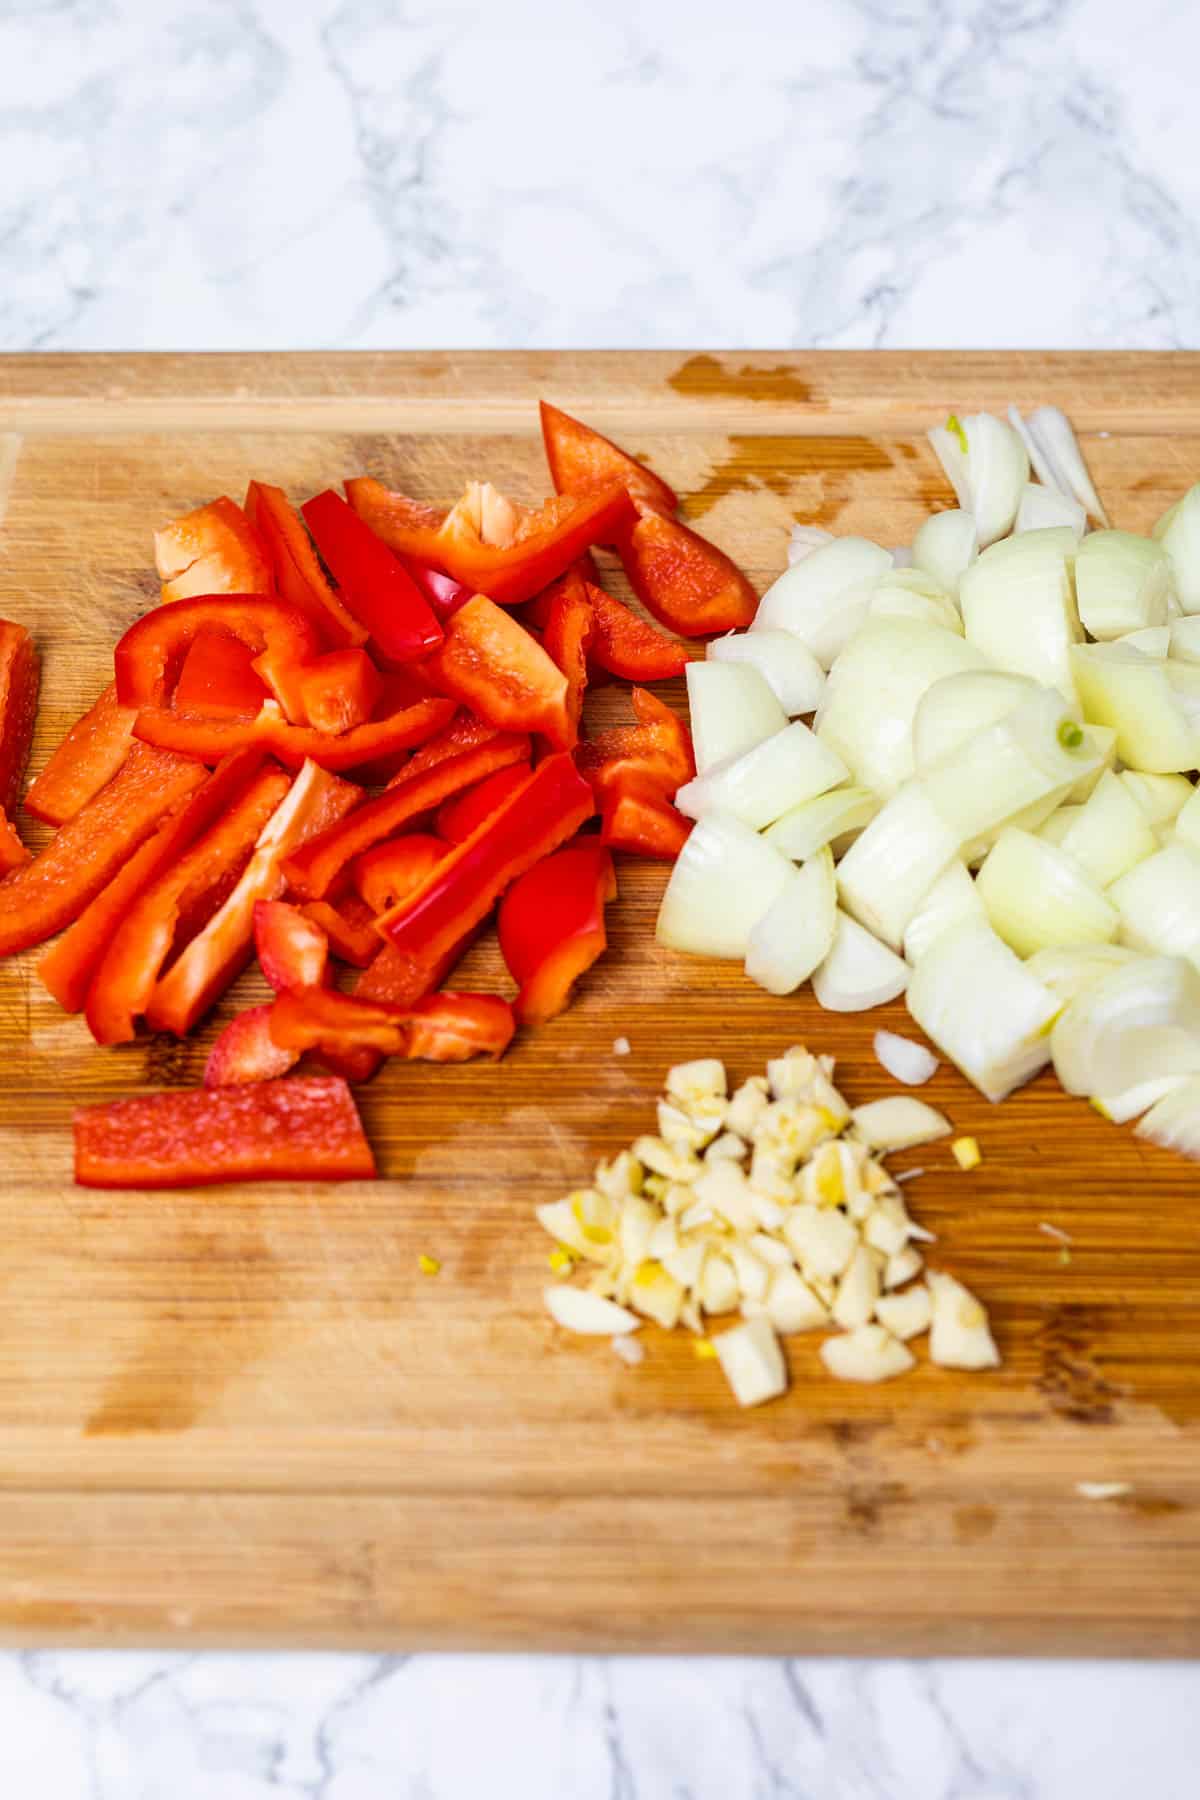 Sliced red bell peppers, onions, and garlic on bamboo cutting board on marble surface